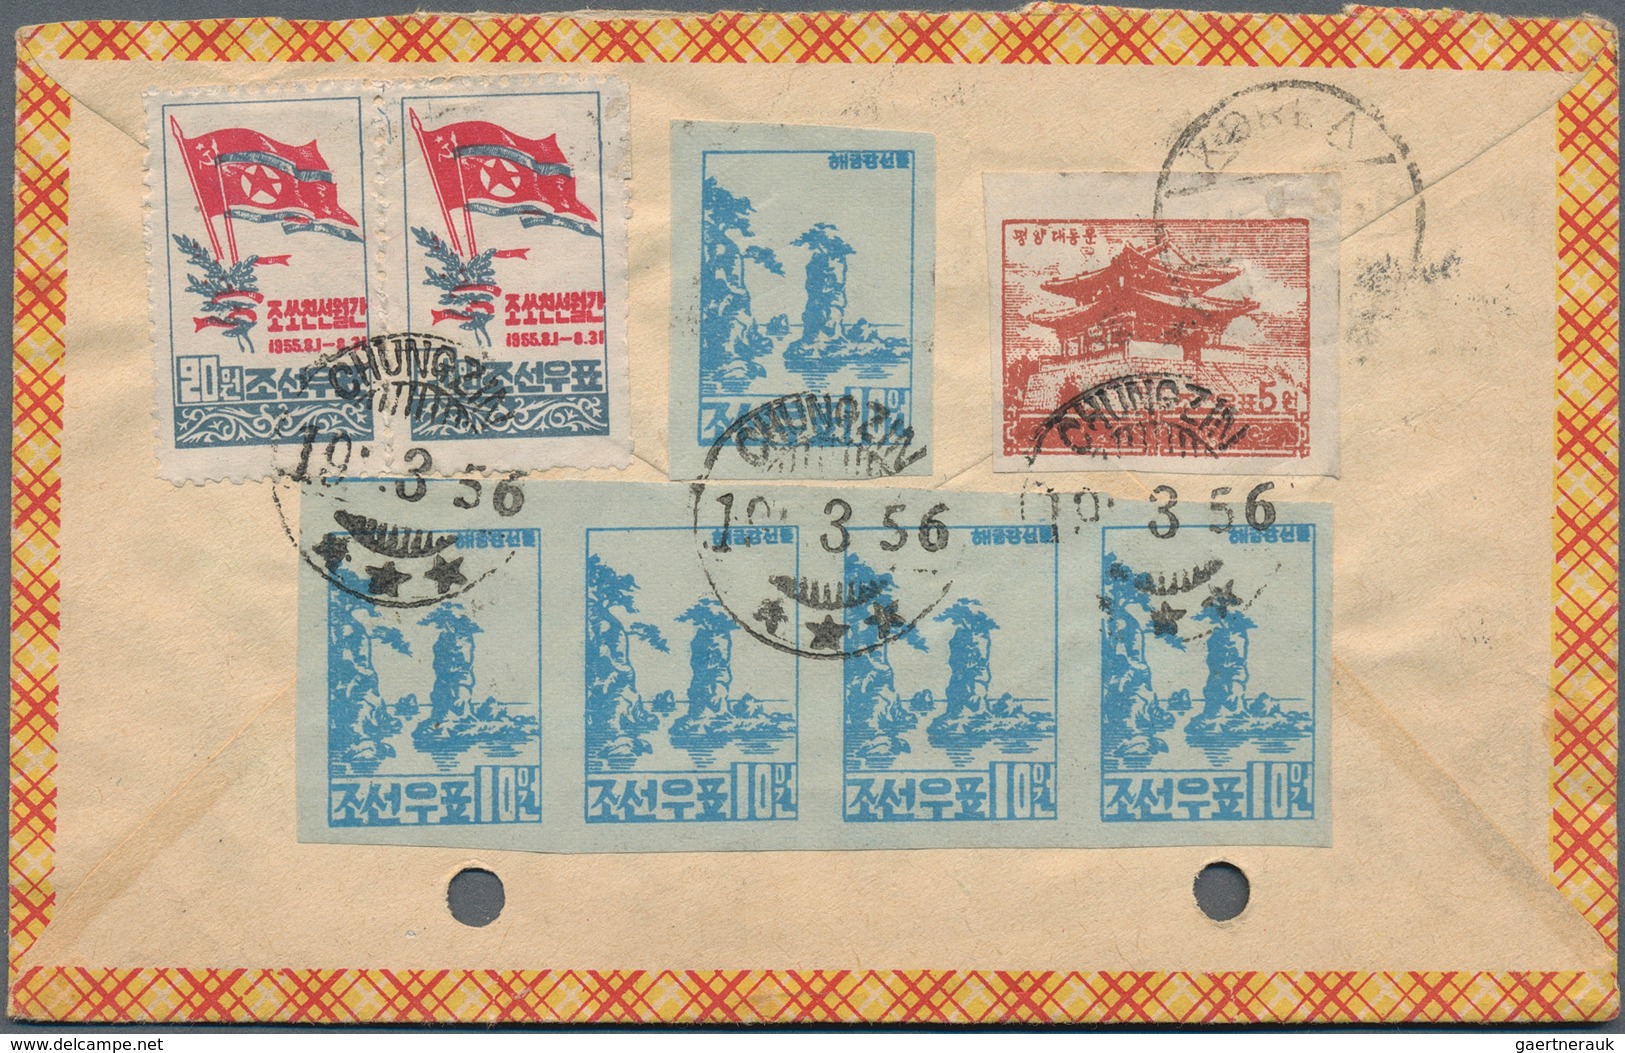 Korea-Nord: 1952/57, covers (8) and used ppc (1) mostly to East Germany but also Czechoslovakia and